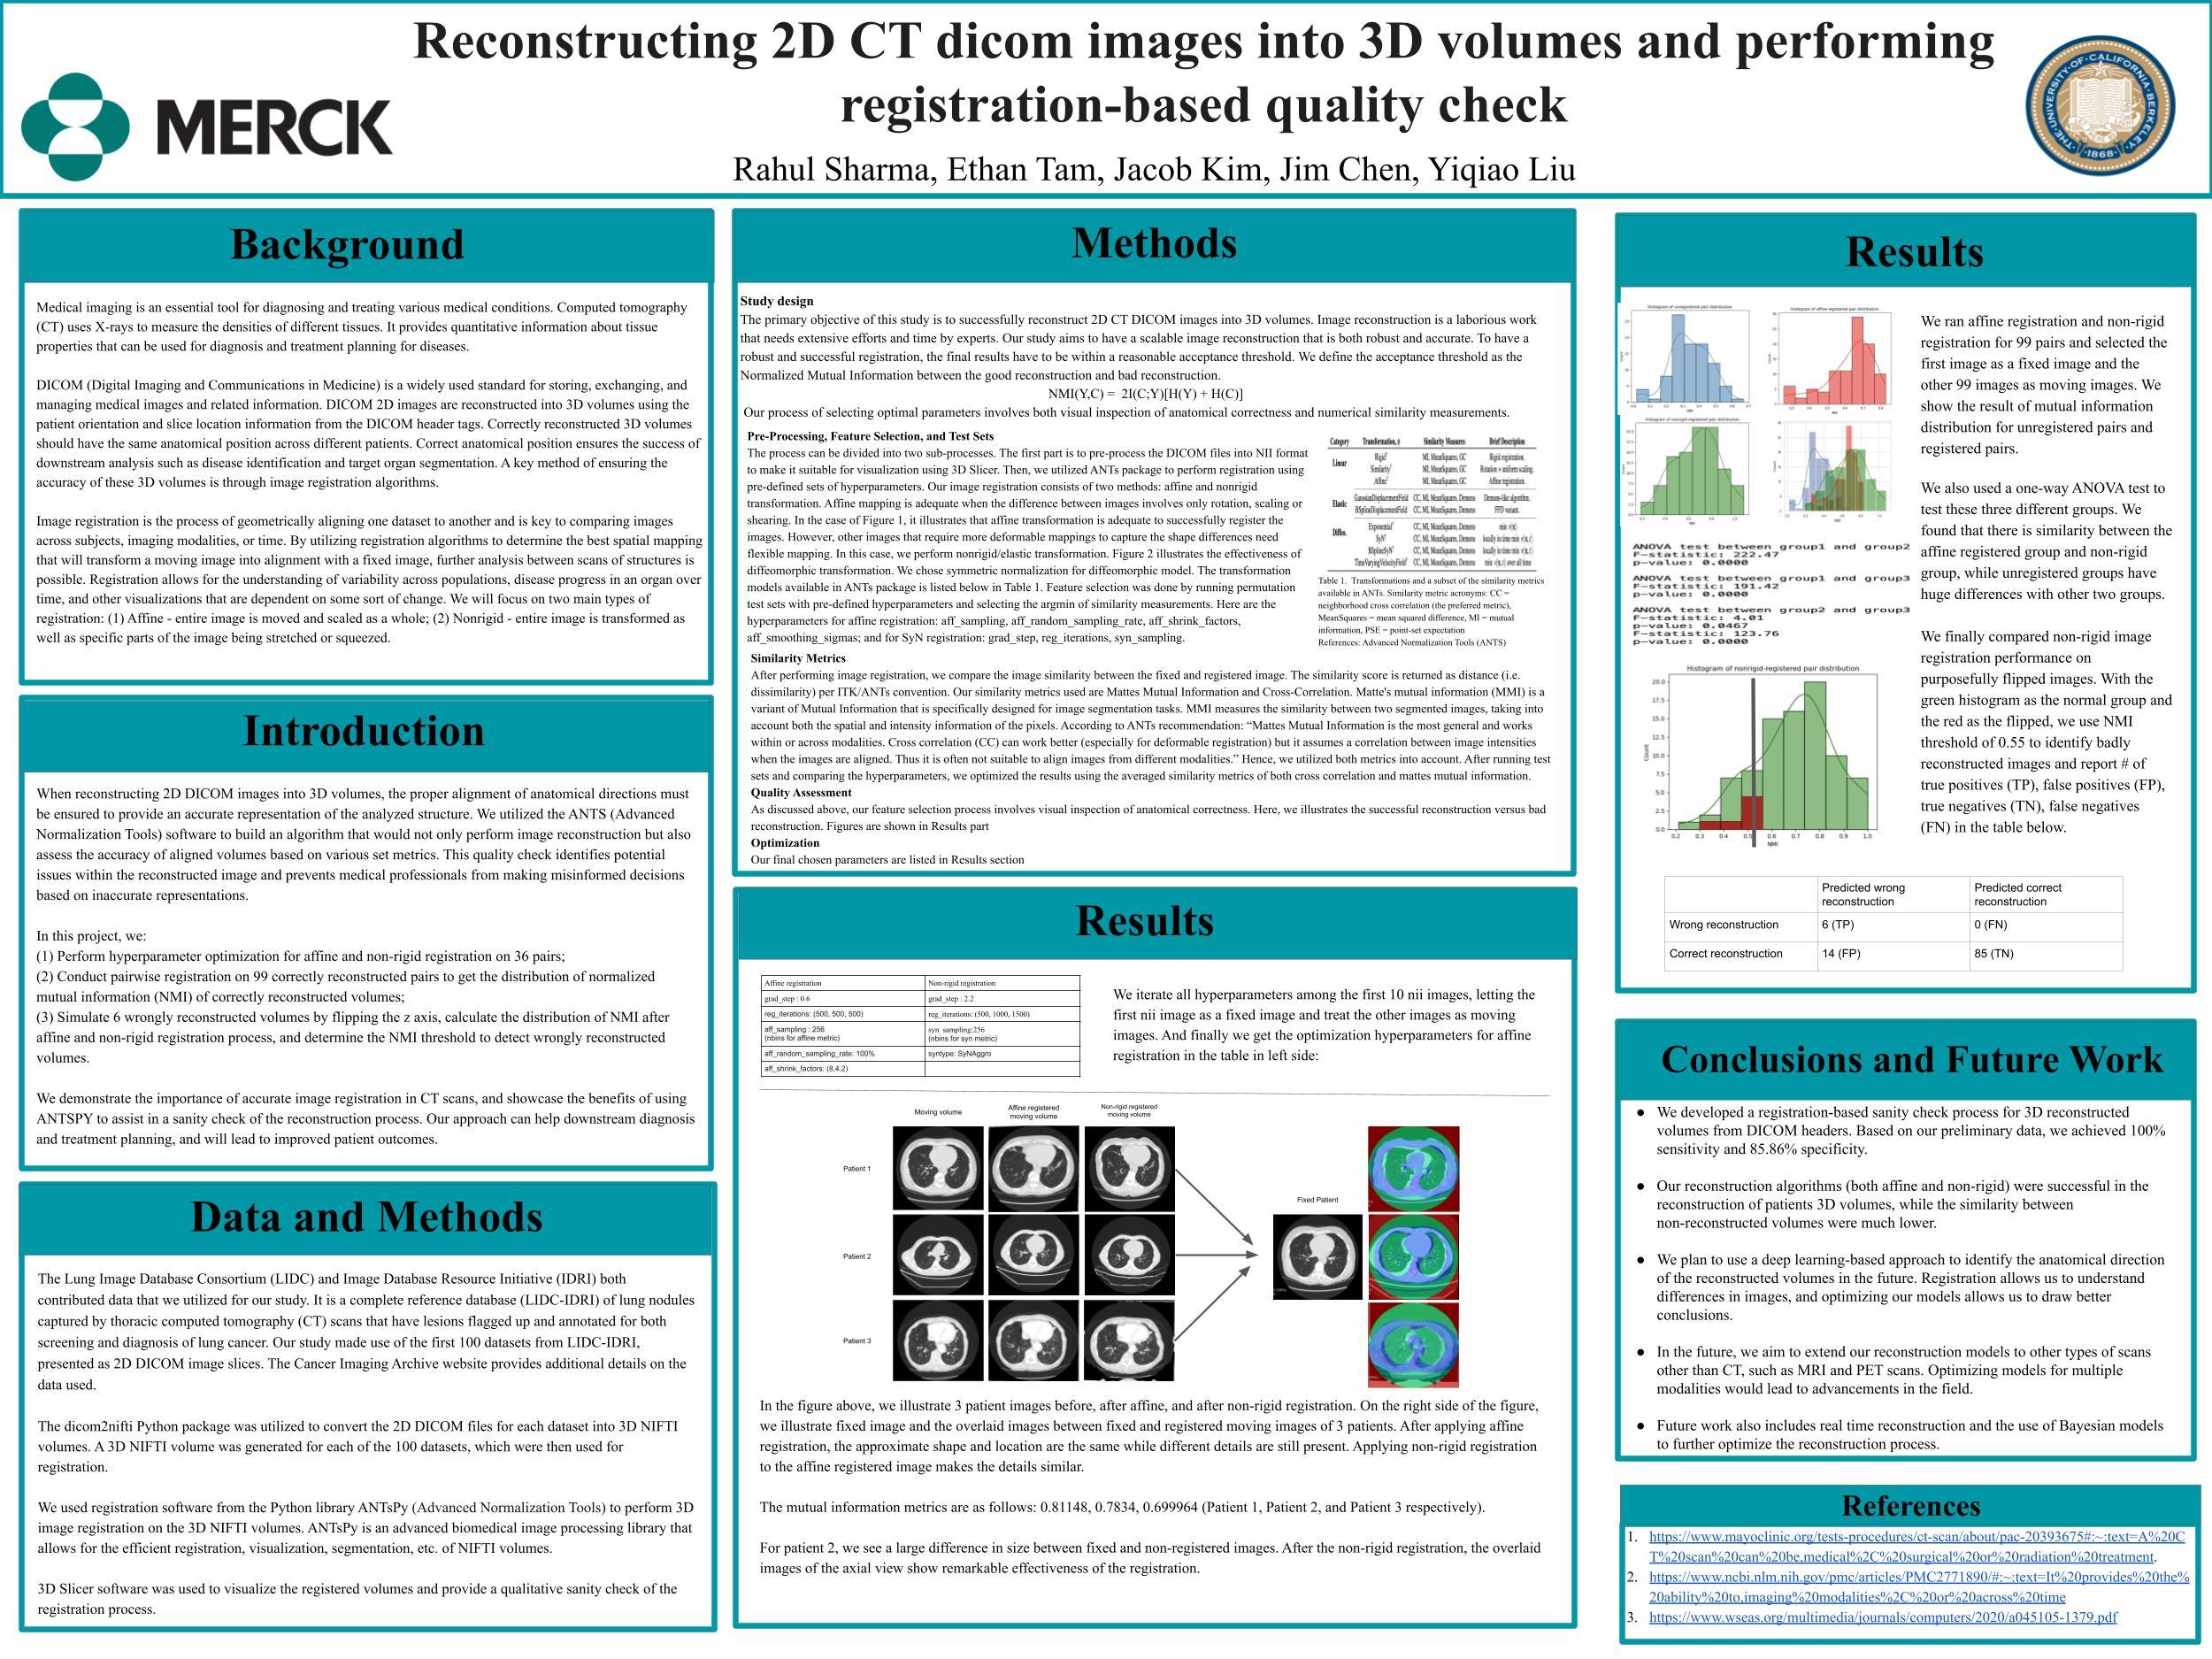 Merck: Reconstructing 2D CT dicom images into 3D volumes and performing registration-based quality check - Spring 2023 Discovery Project